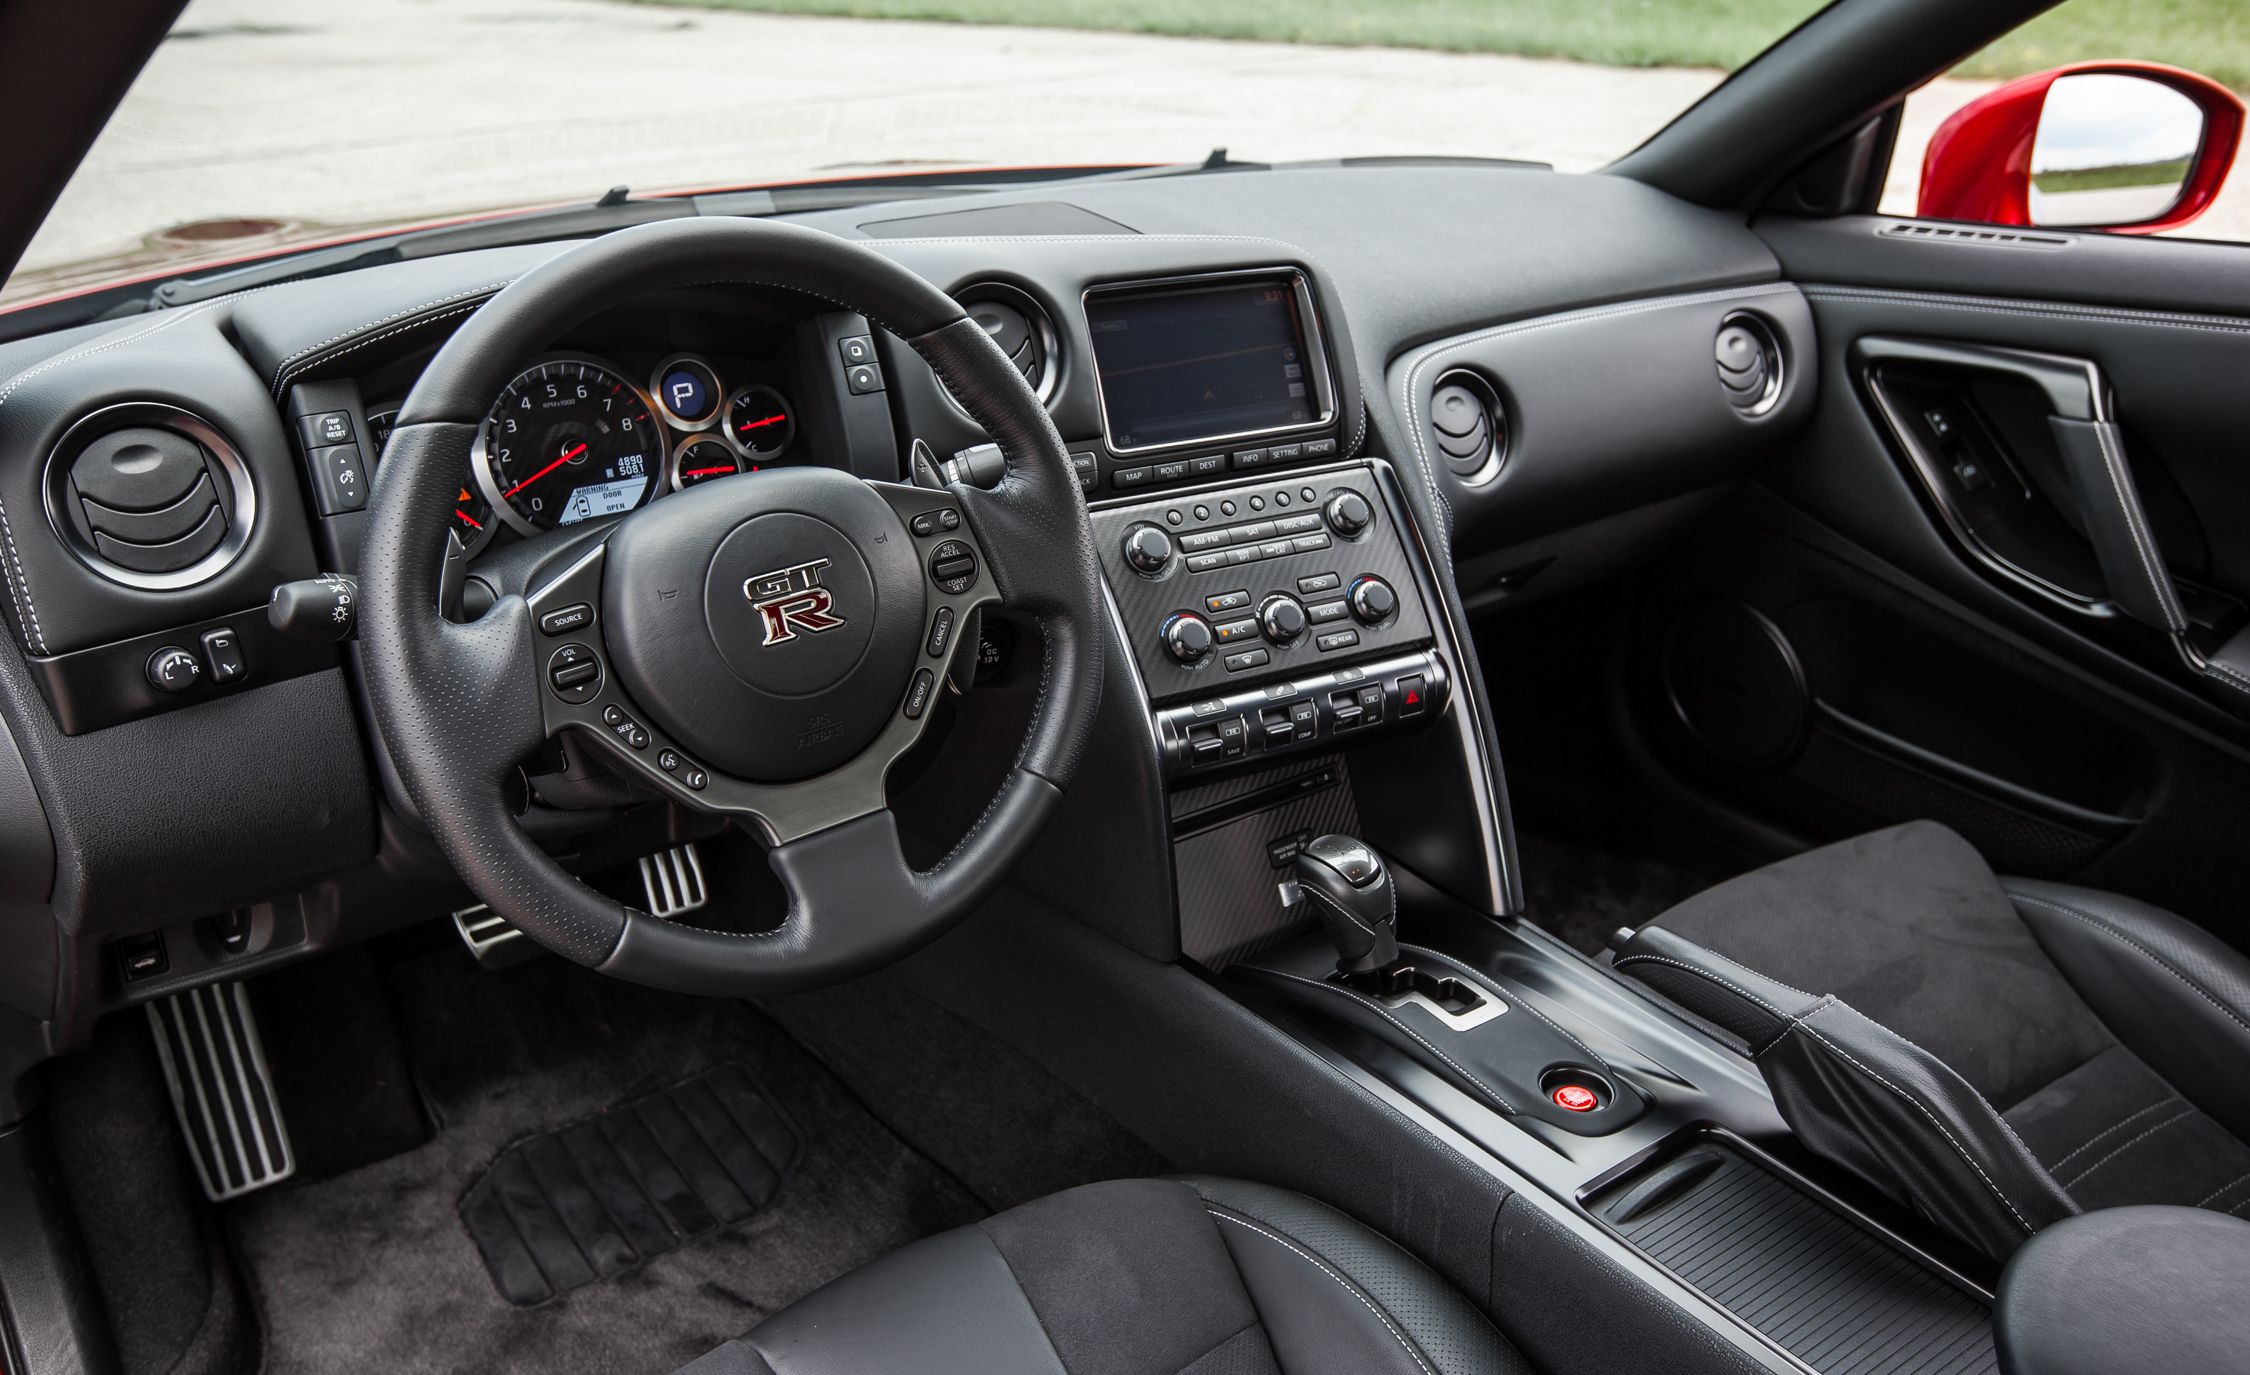 2015 Nissan GT R Interior (View 10 of 25)